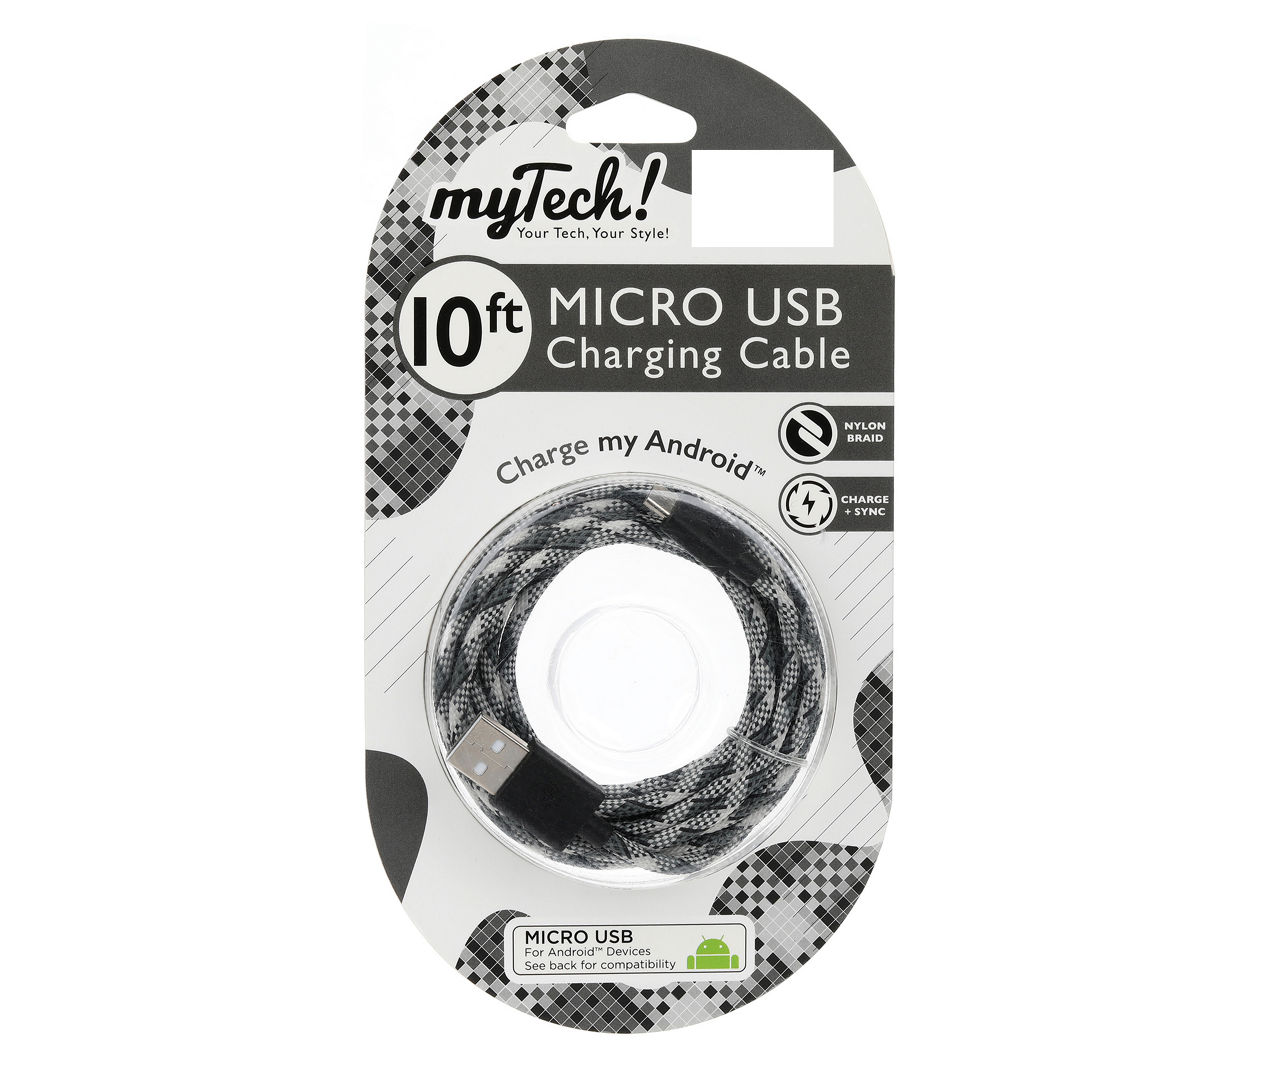 Black & White Braided 10' Micro USB Cable